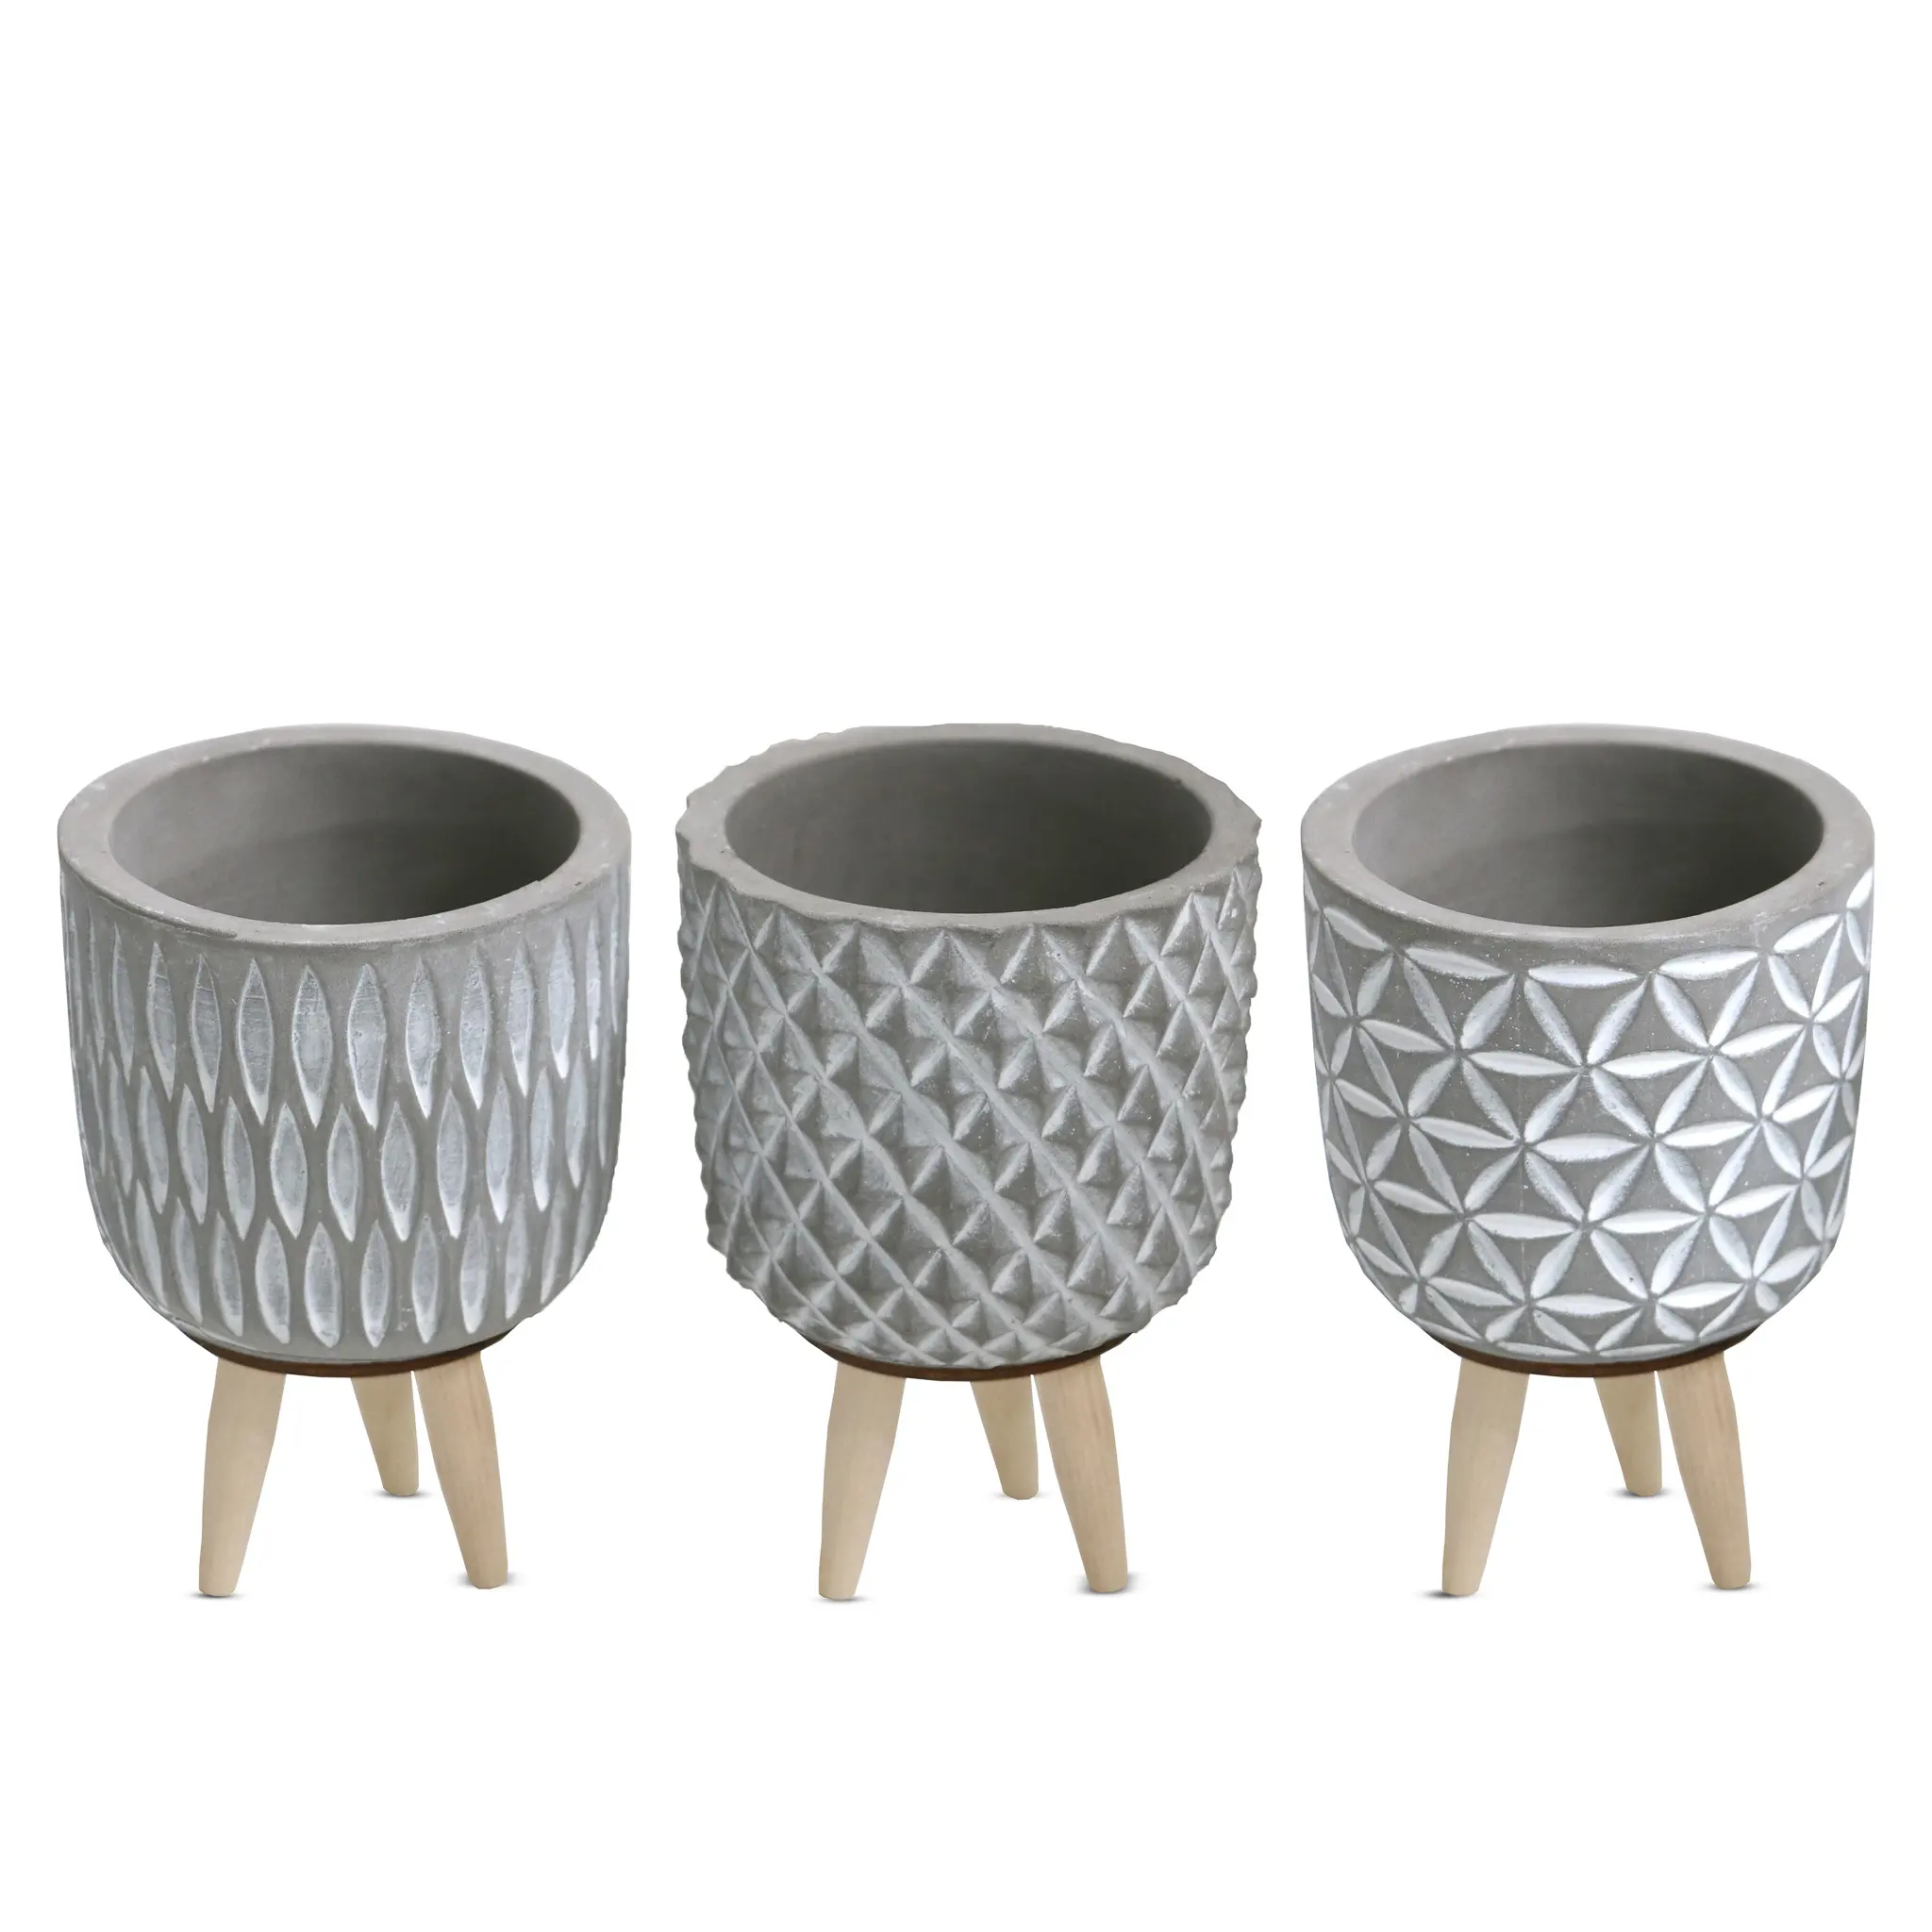 Home Decor Trendy Ceramic Flower pot - Pattern with Wooden Legs available in multiple sizes for Wholesale